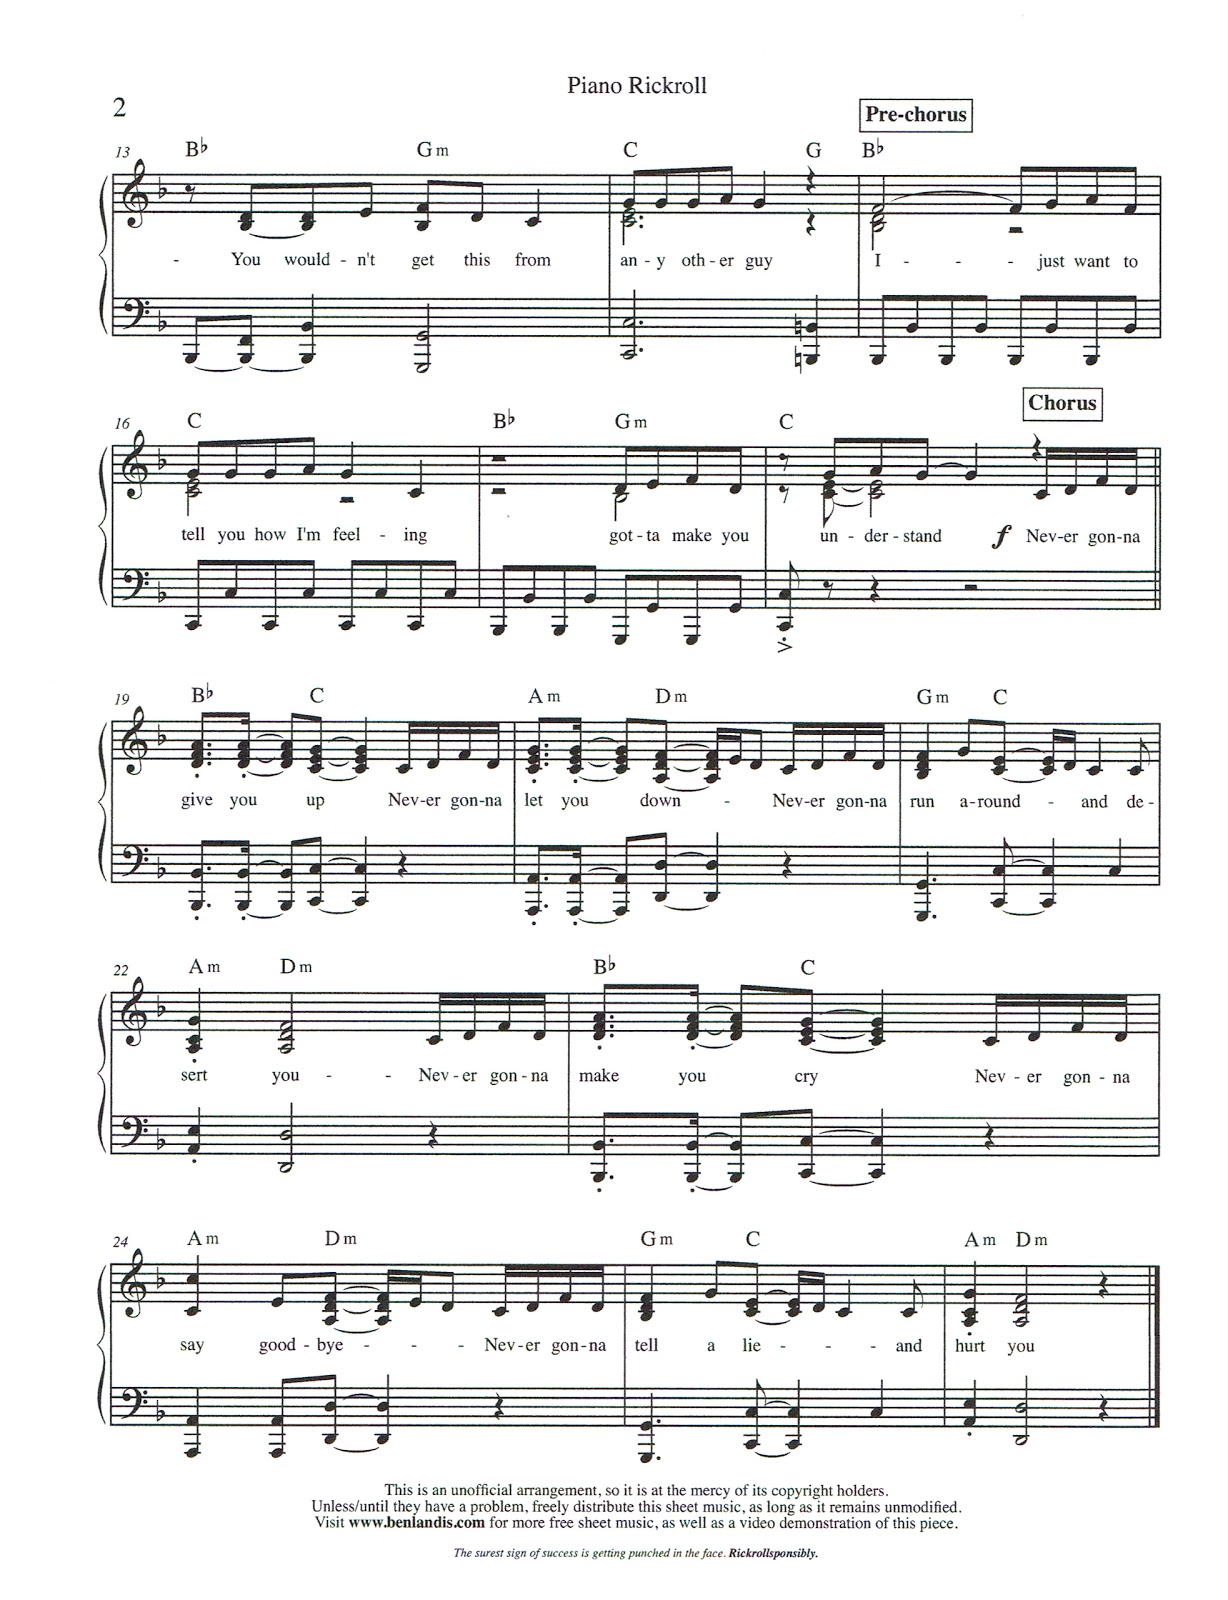 SHEET MUSIC - SOAD727: Rick Astley - Never Gonna Give You Up Sheet Music